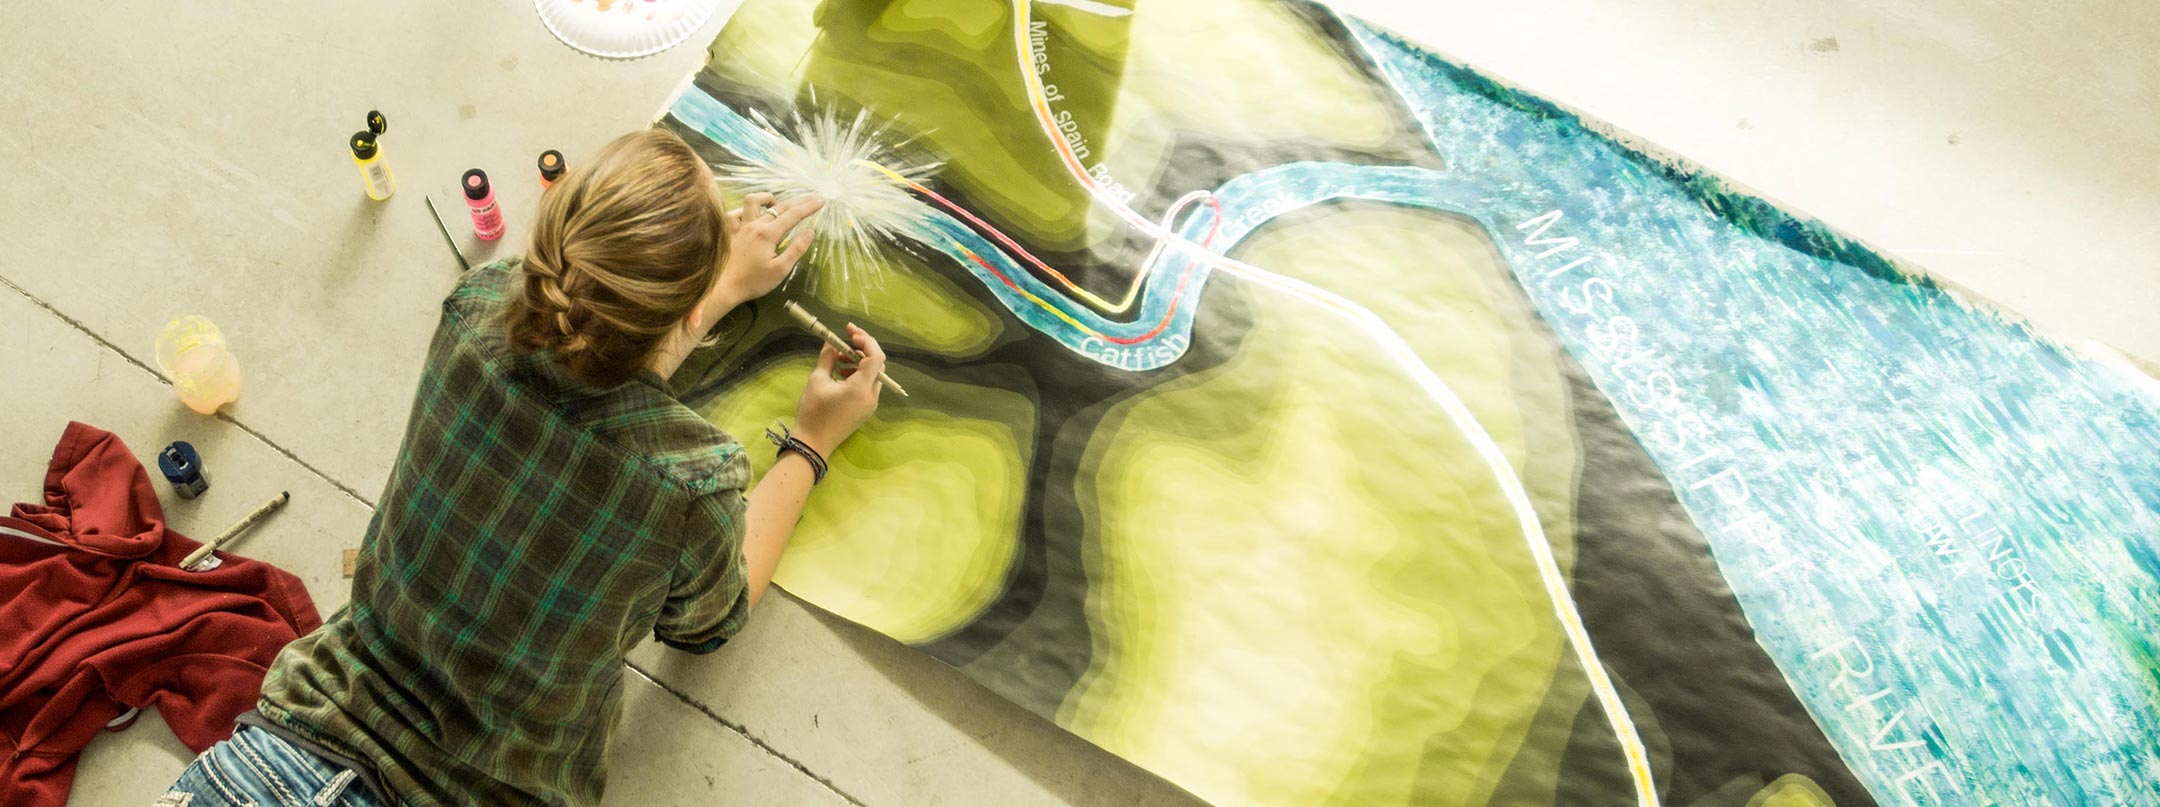 A student paints project on the floor.